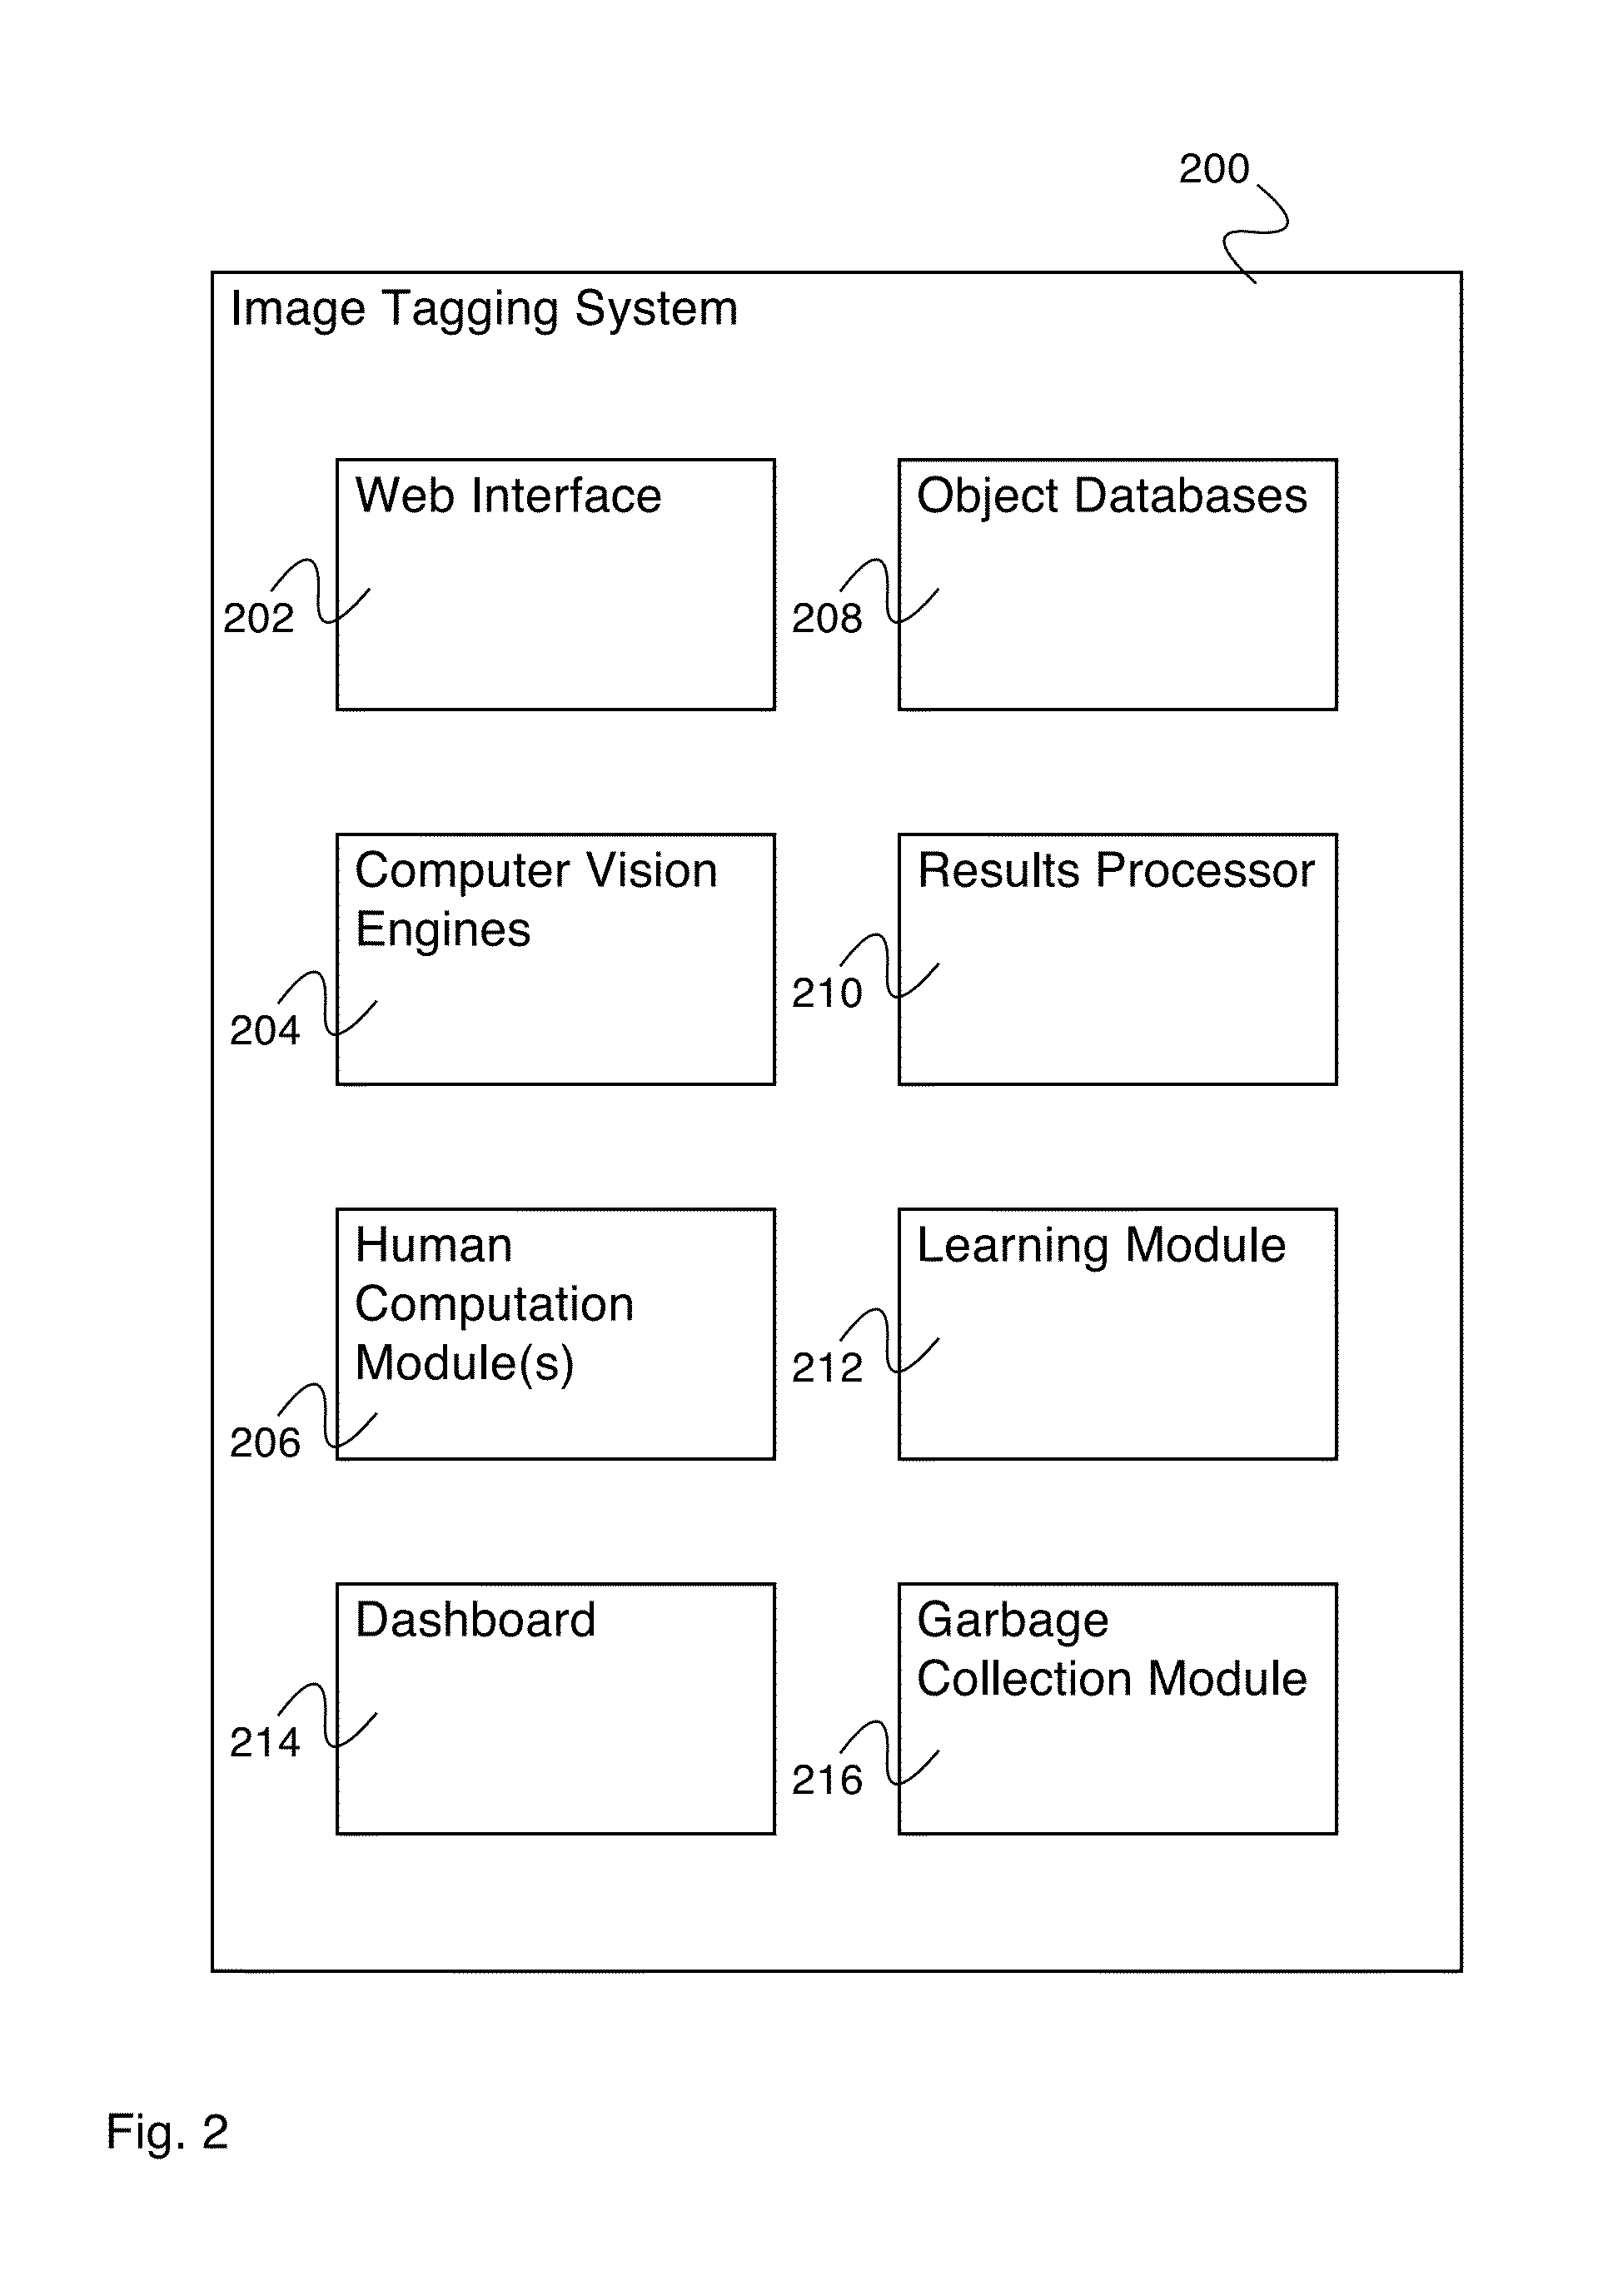 Monitoring an any-image labeling engine